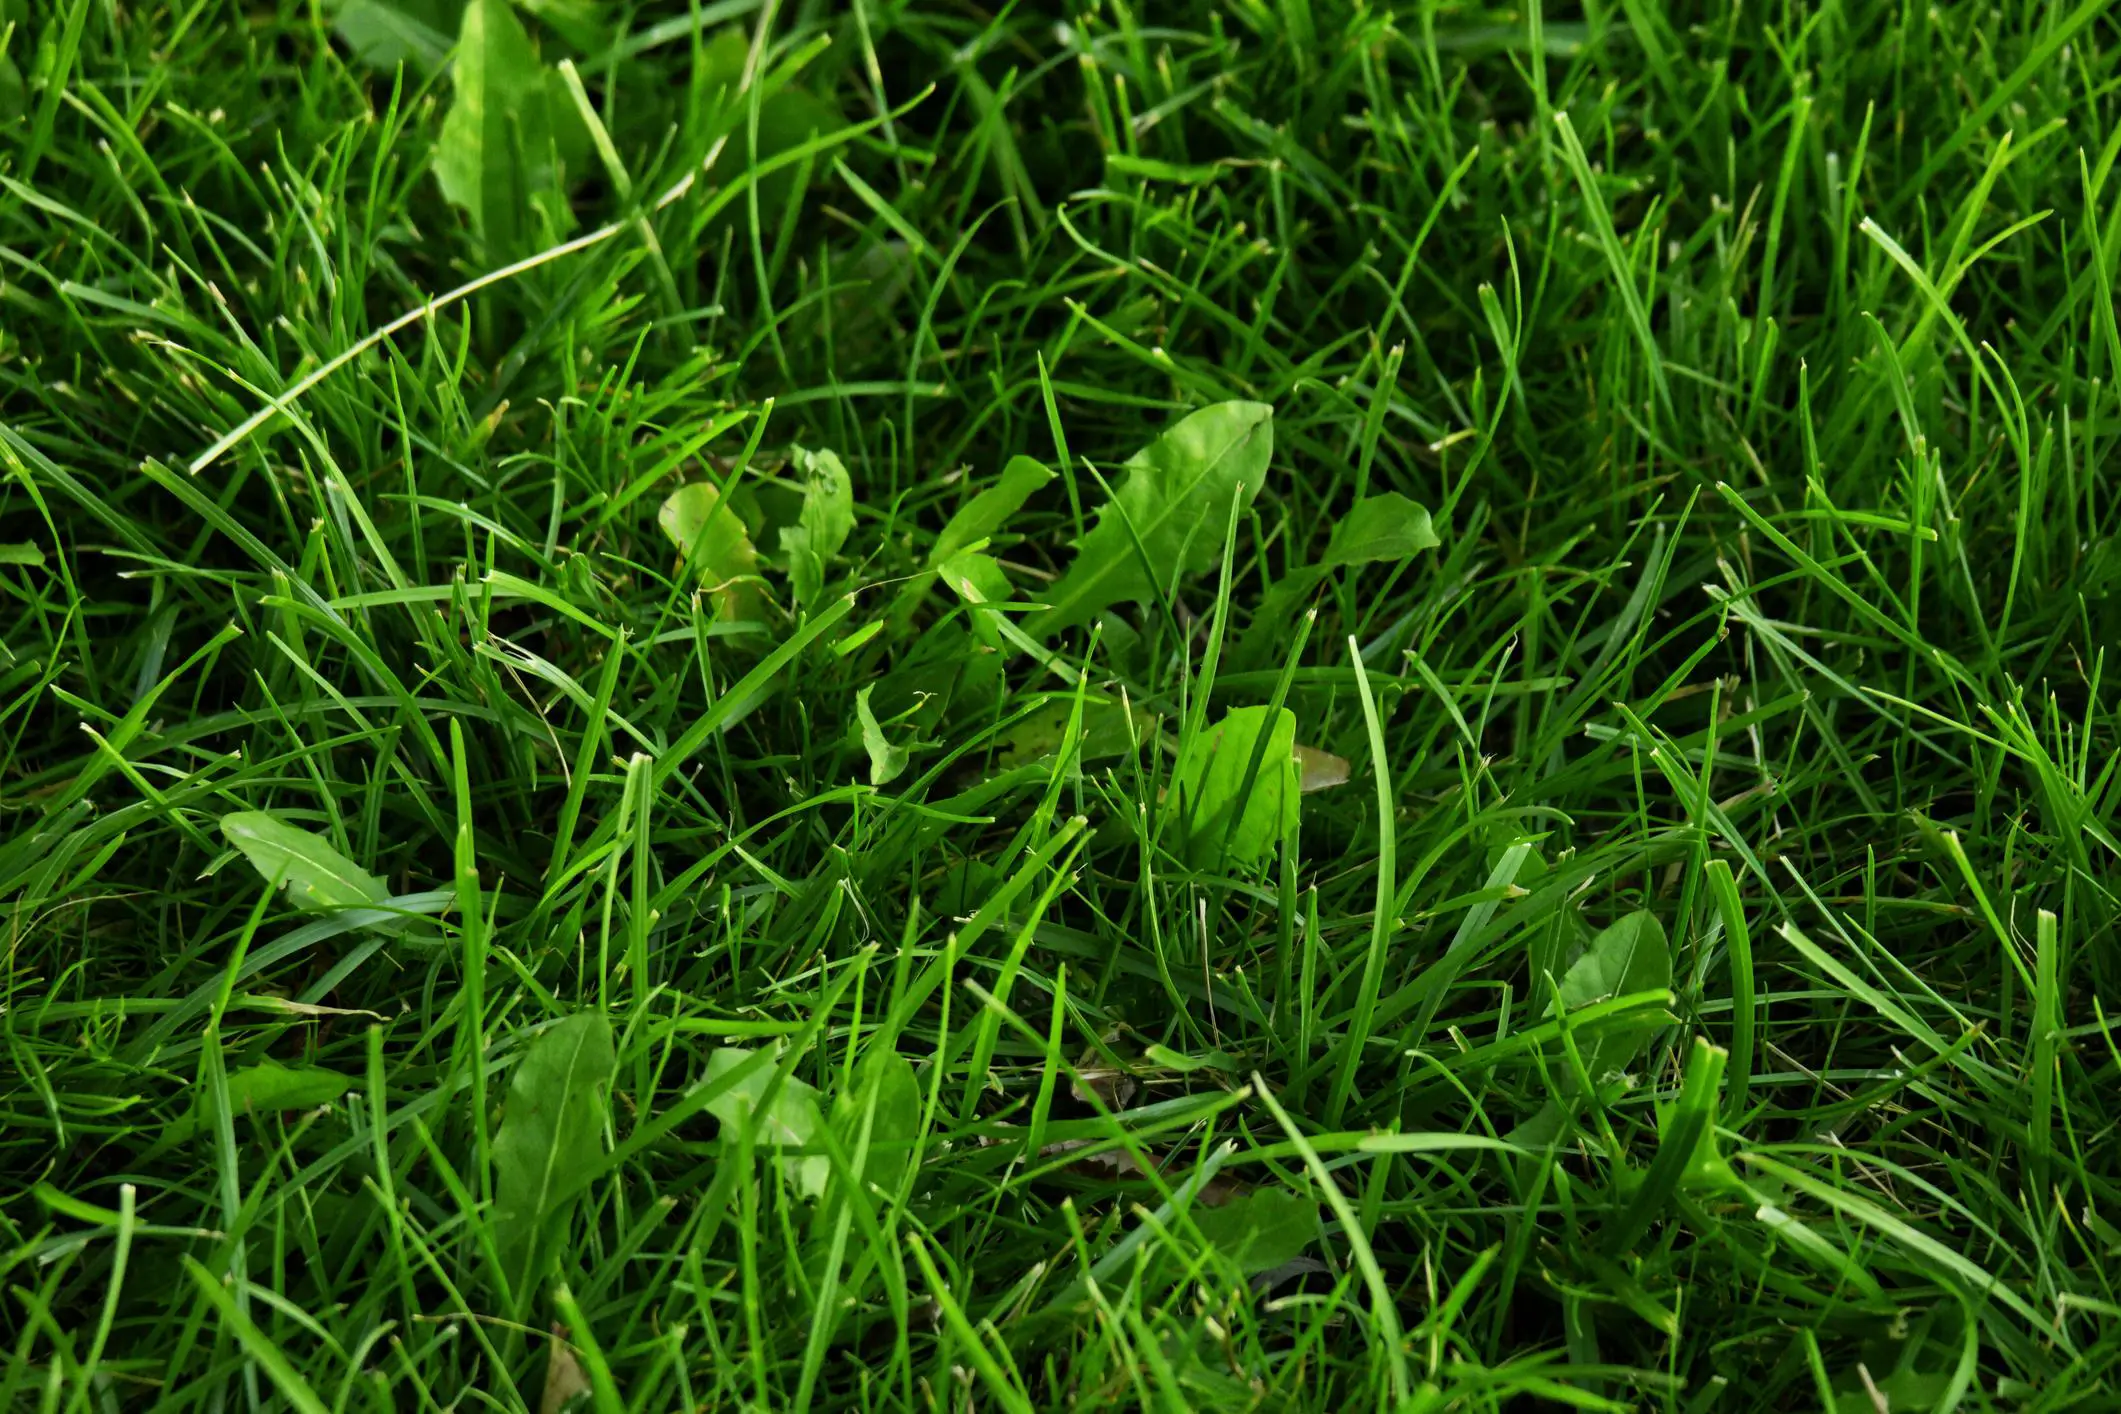 How to get rid of broadleaf weeds from your lawn